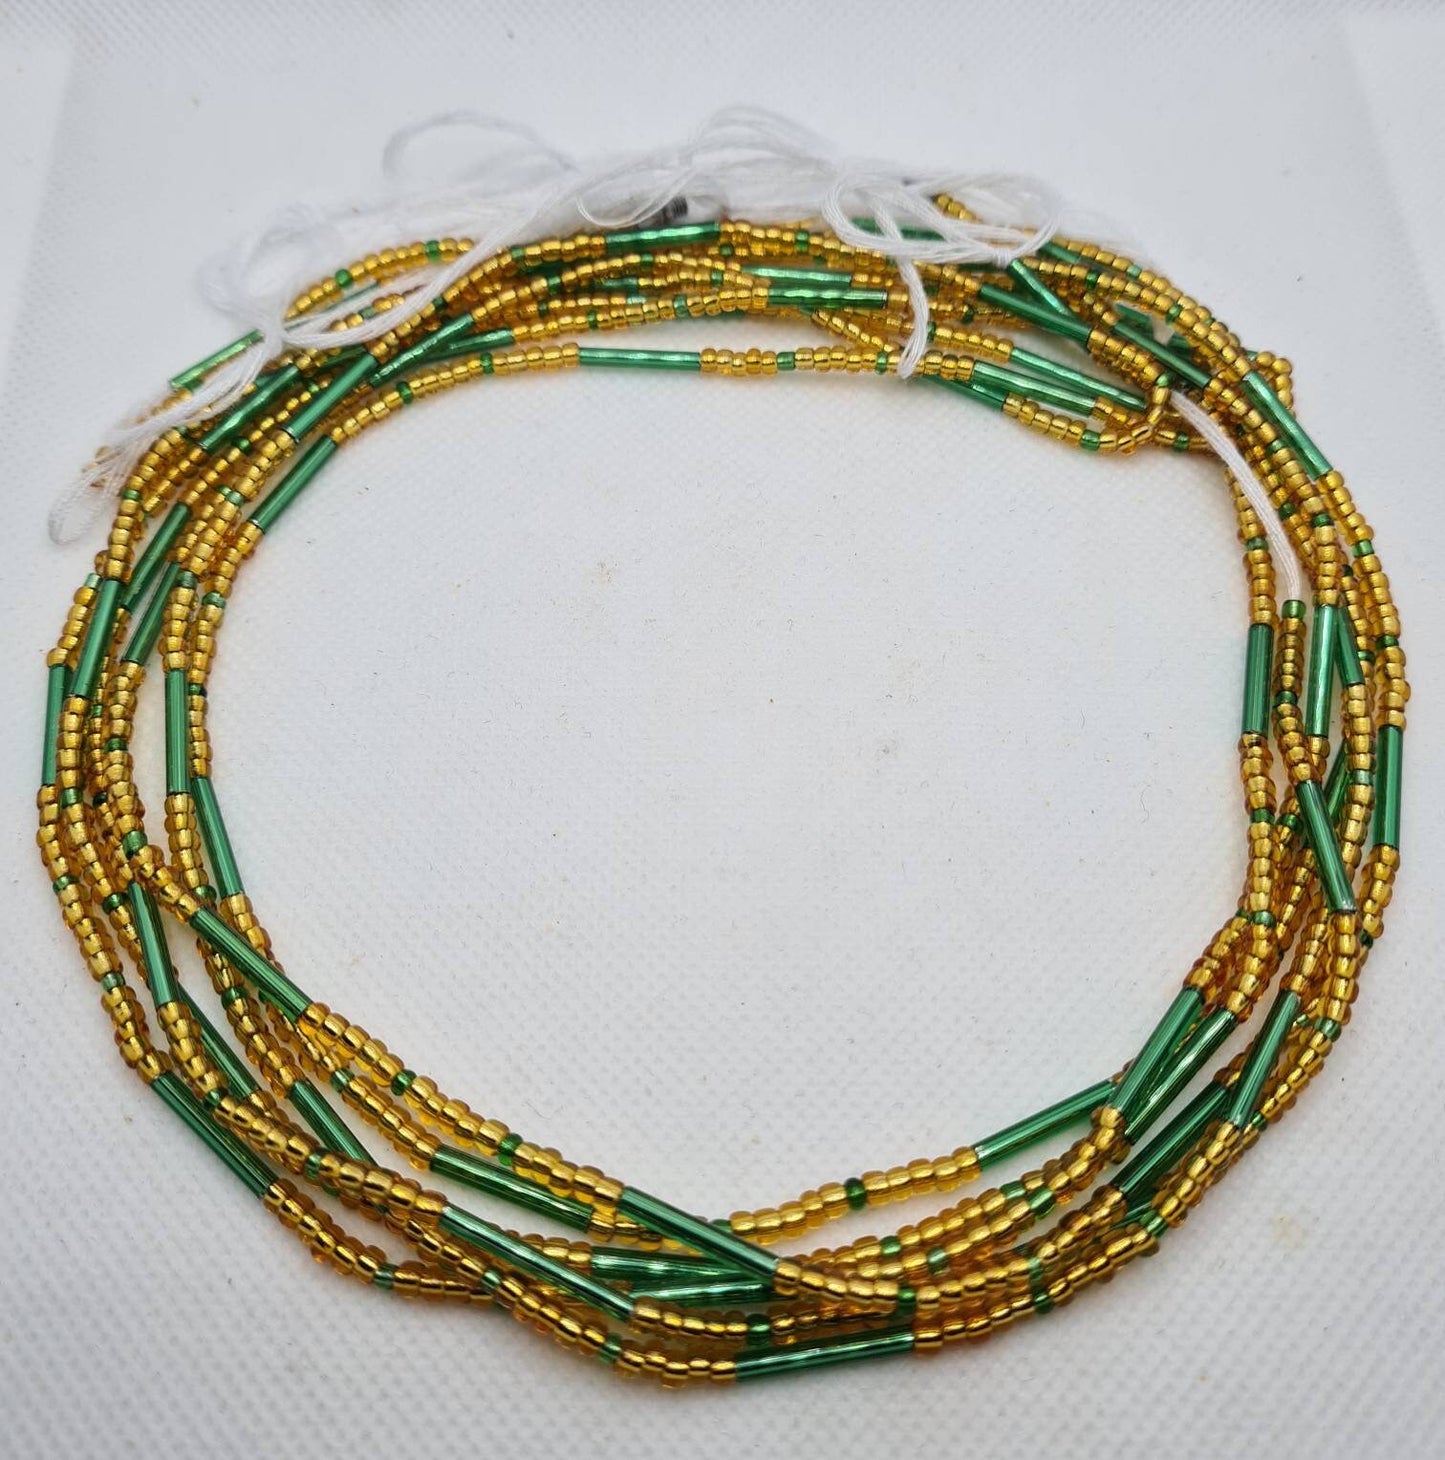 Green and Gold Waist Beads|On Sale Belly Chain Weight control African beads|belly beads| Ghana beads| Weight Tracker